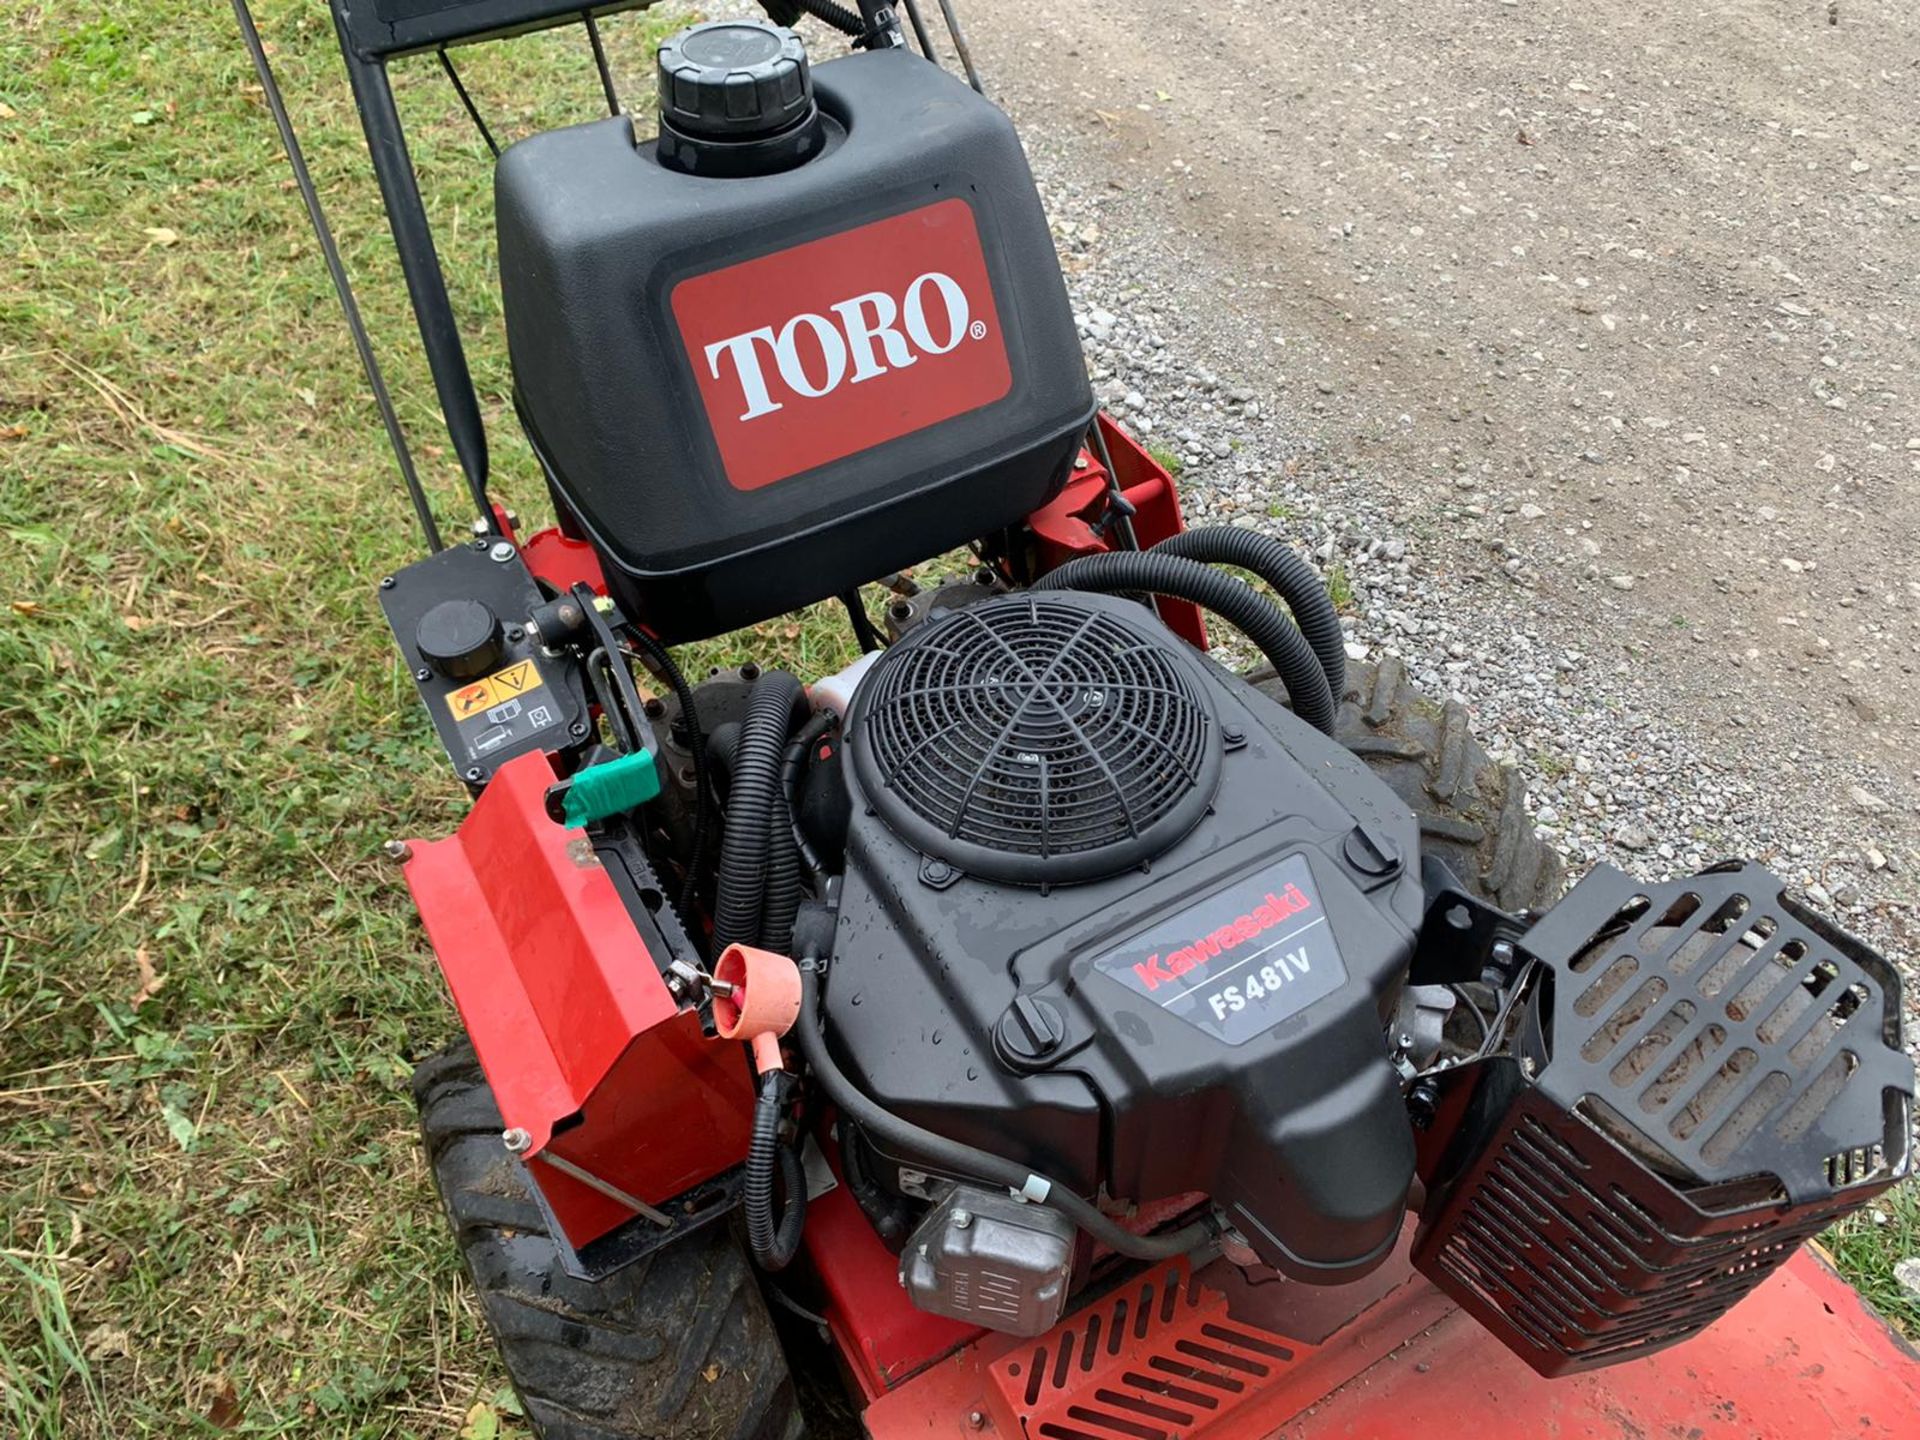 TORO 36" WALK BEHIND PEDESTRIAN MOWER, RUNS DRIVES AND CUTS WELL, PULL OR ELECTRIC START - Image 7 of 10